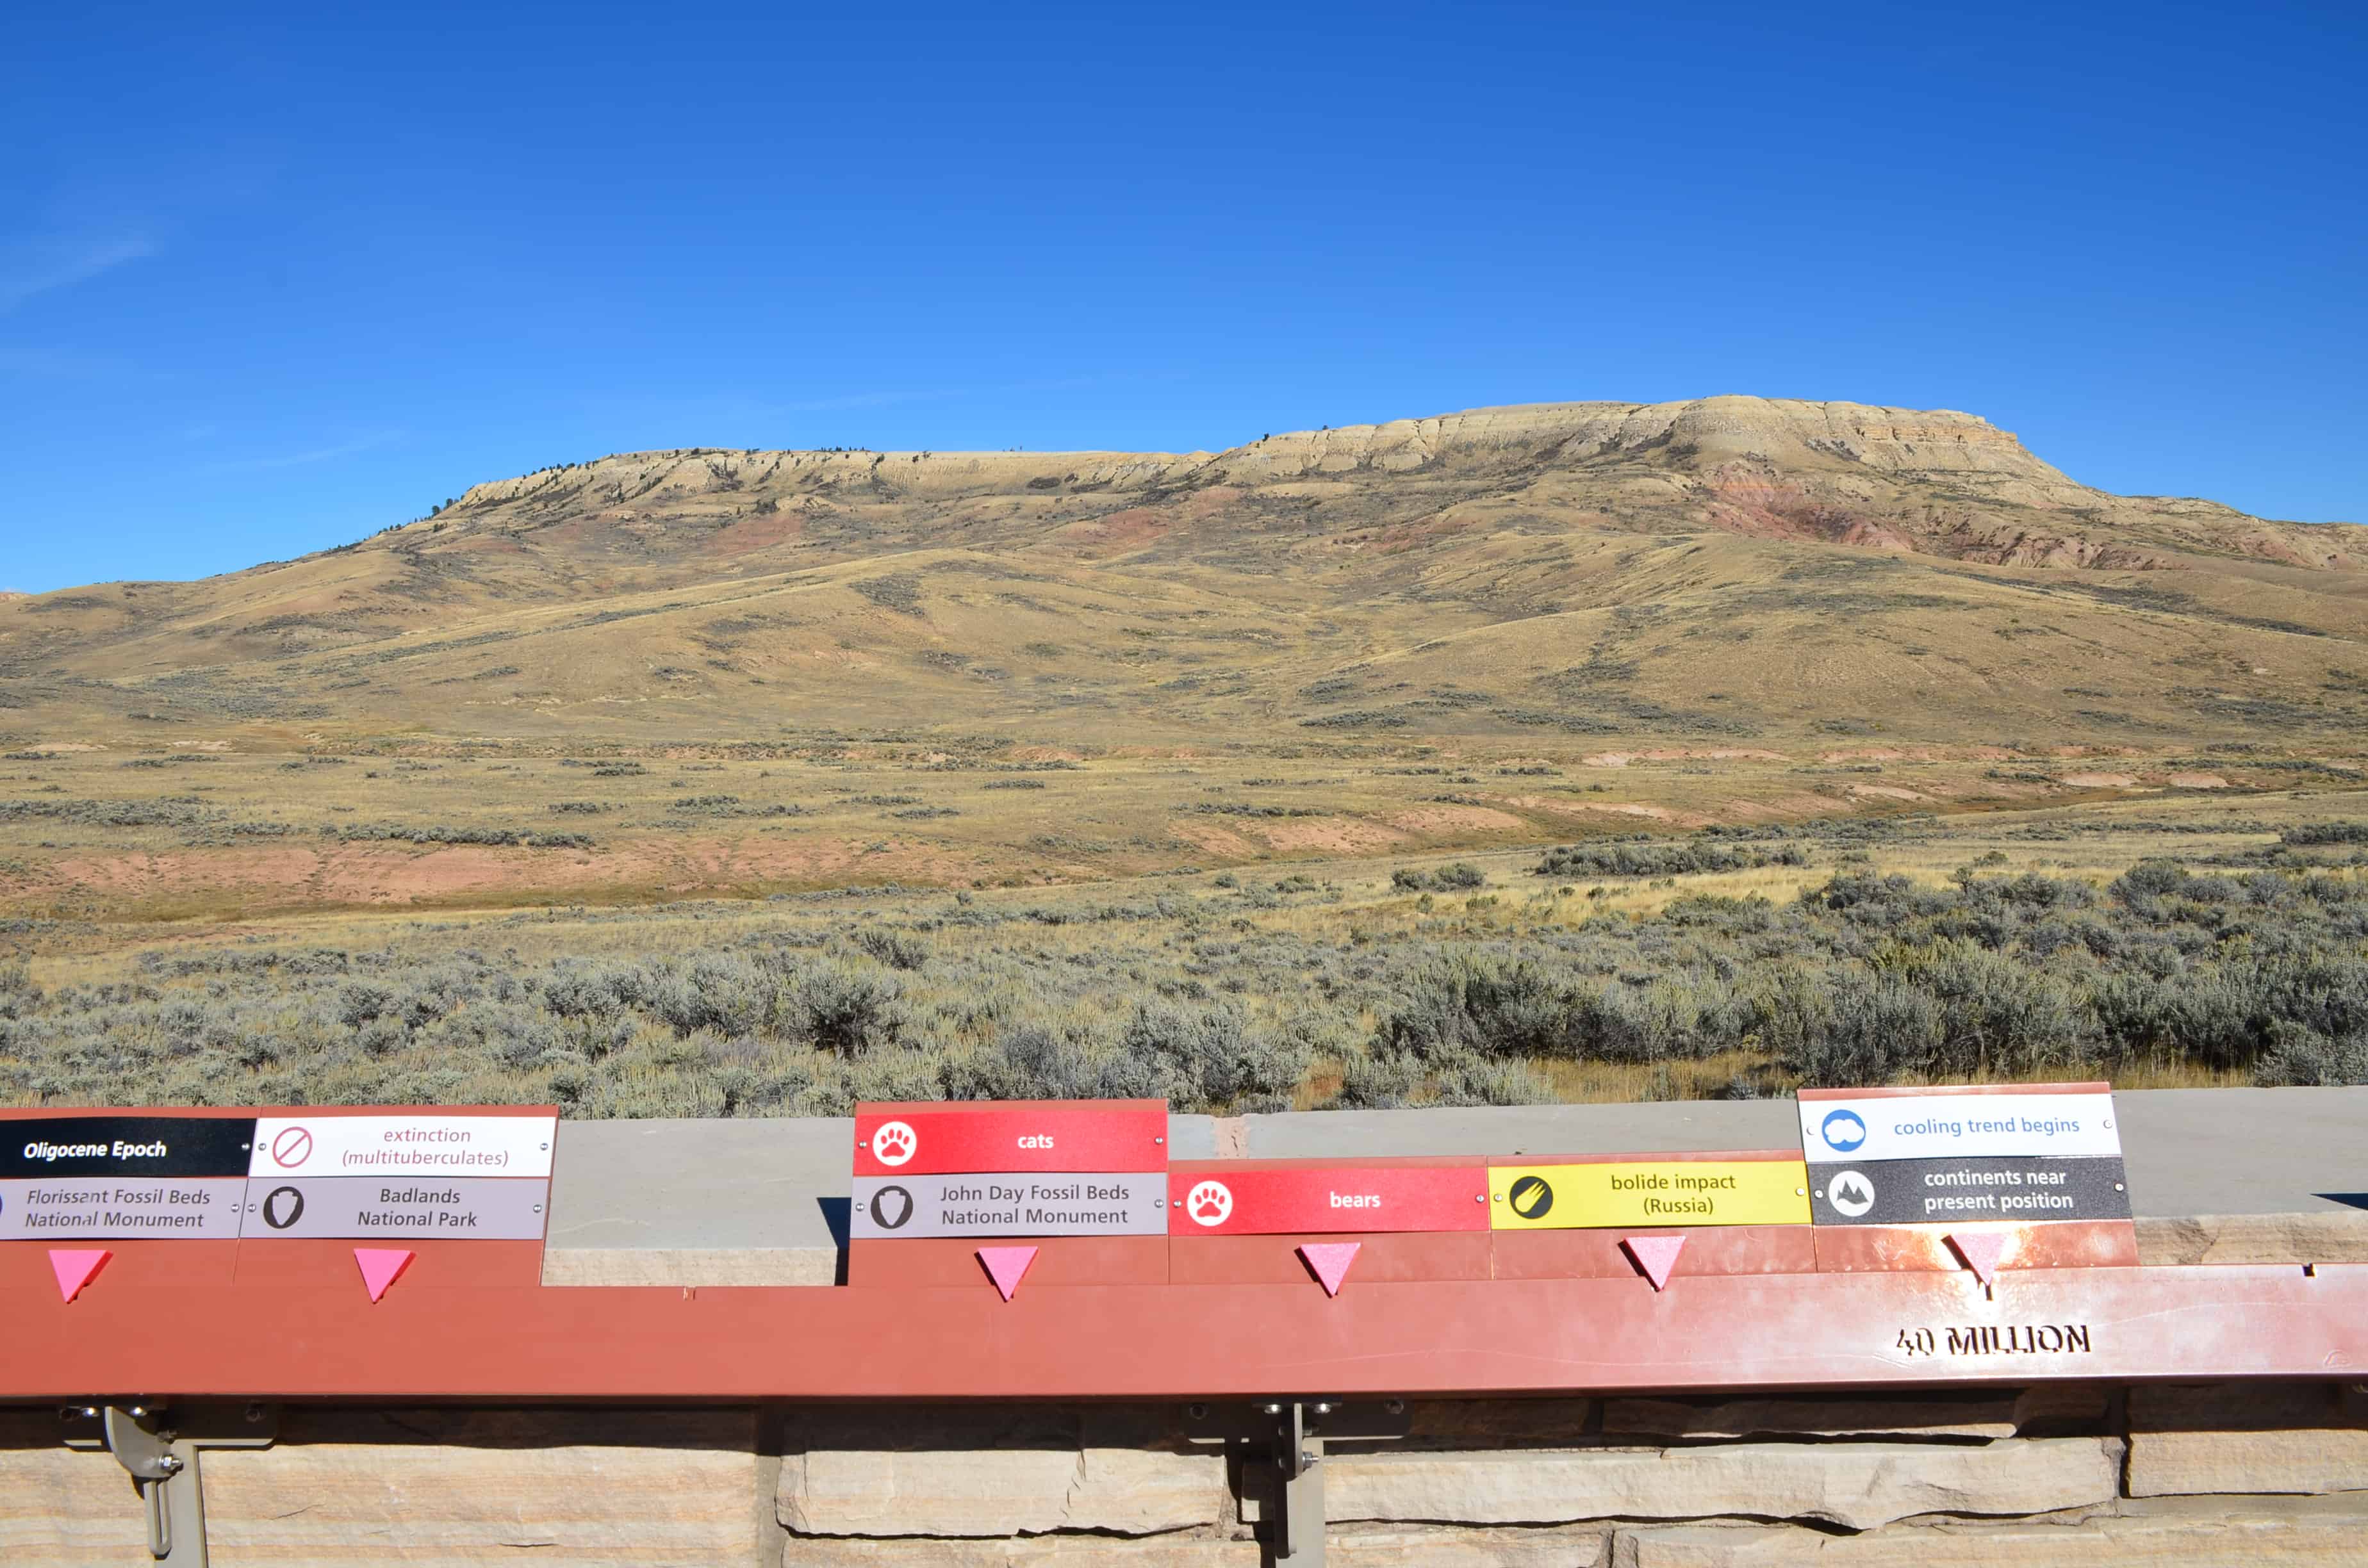 Timeline at Fossil Butte National Monument, Wyoming